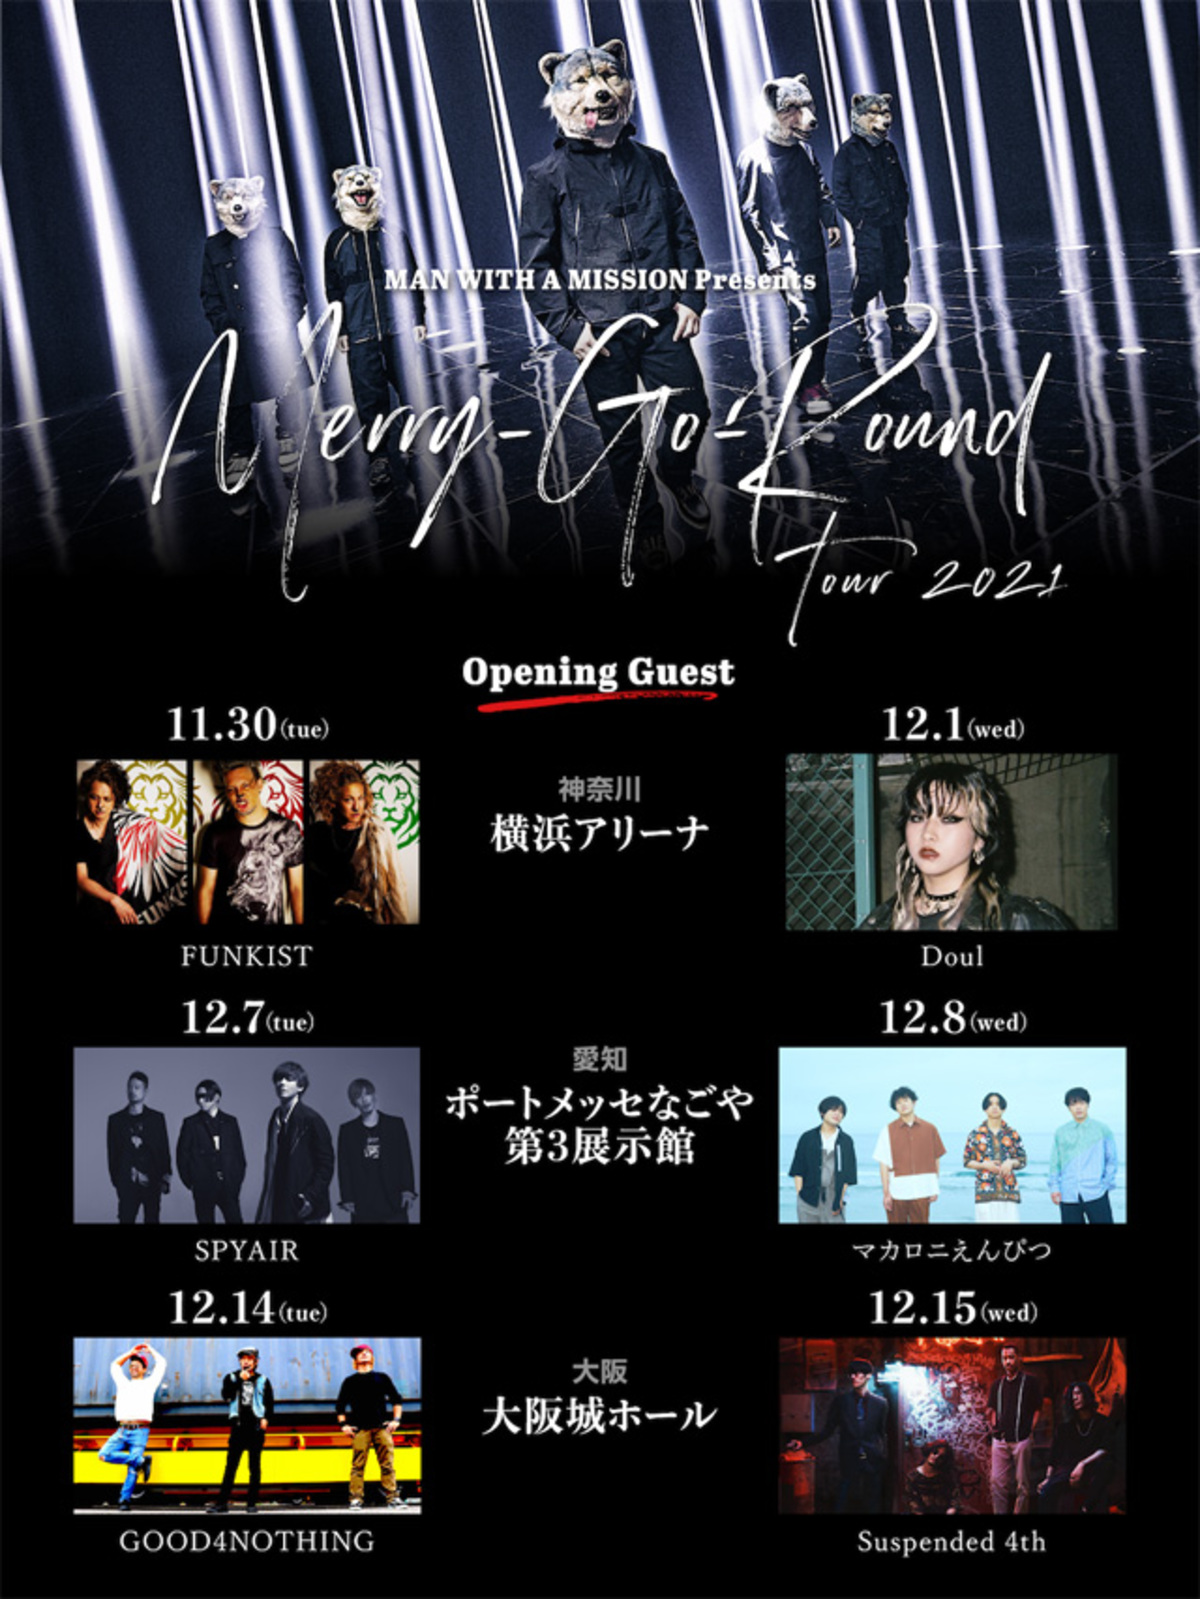 Man With A Mission アリーナ ツアーにマカロニえんぴつ Spyair Good4nothing Suspended 4th Funkist Doul参戦 盟友 ニューカマーとの共演が決定